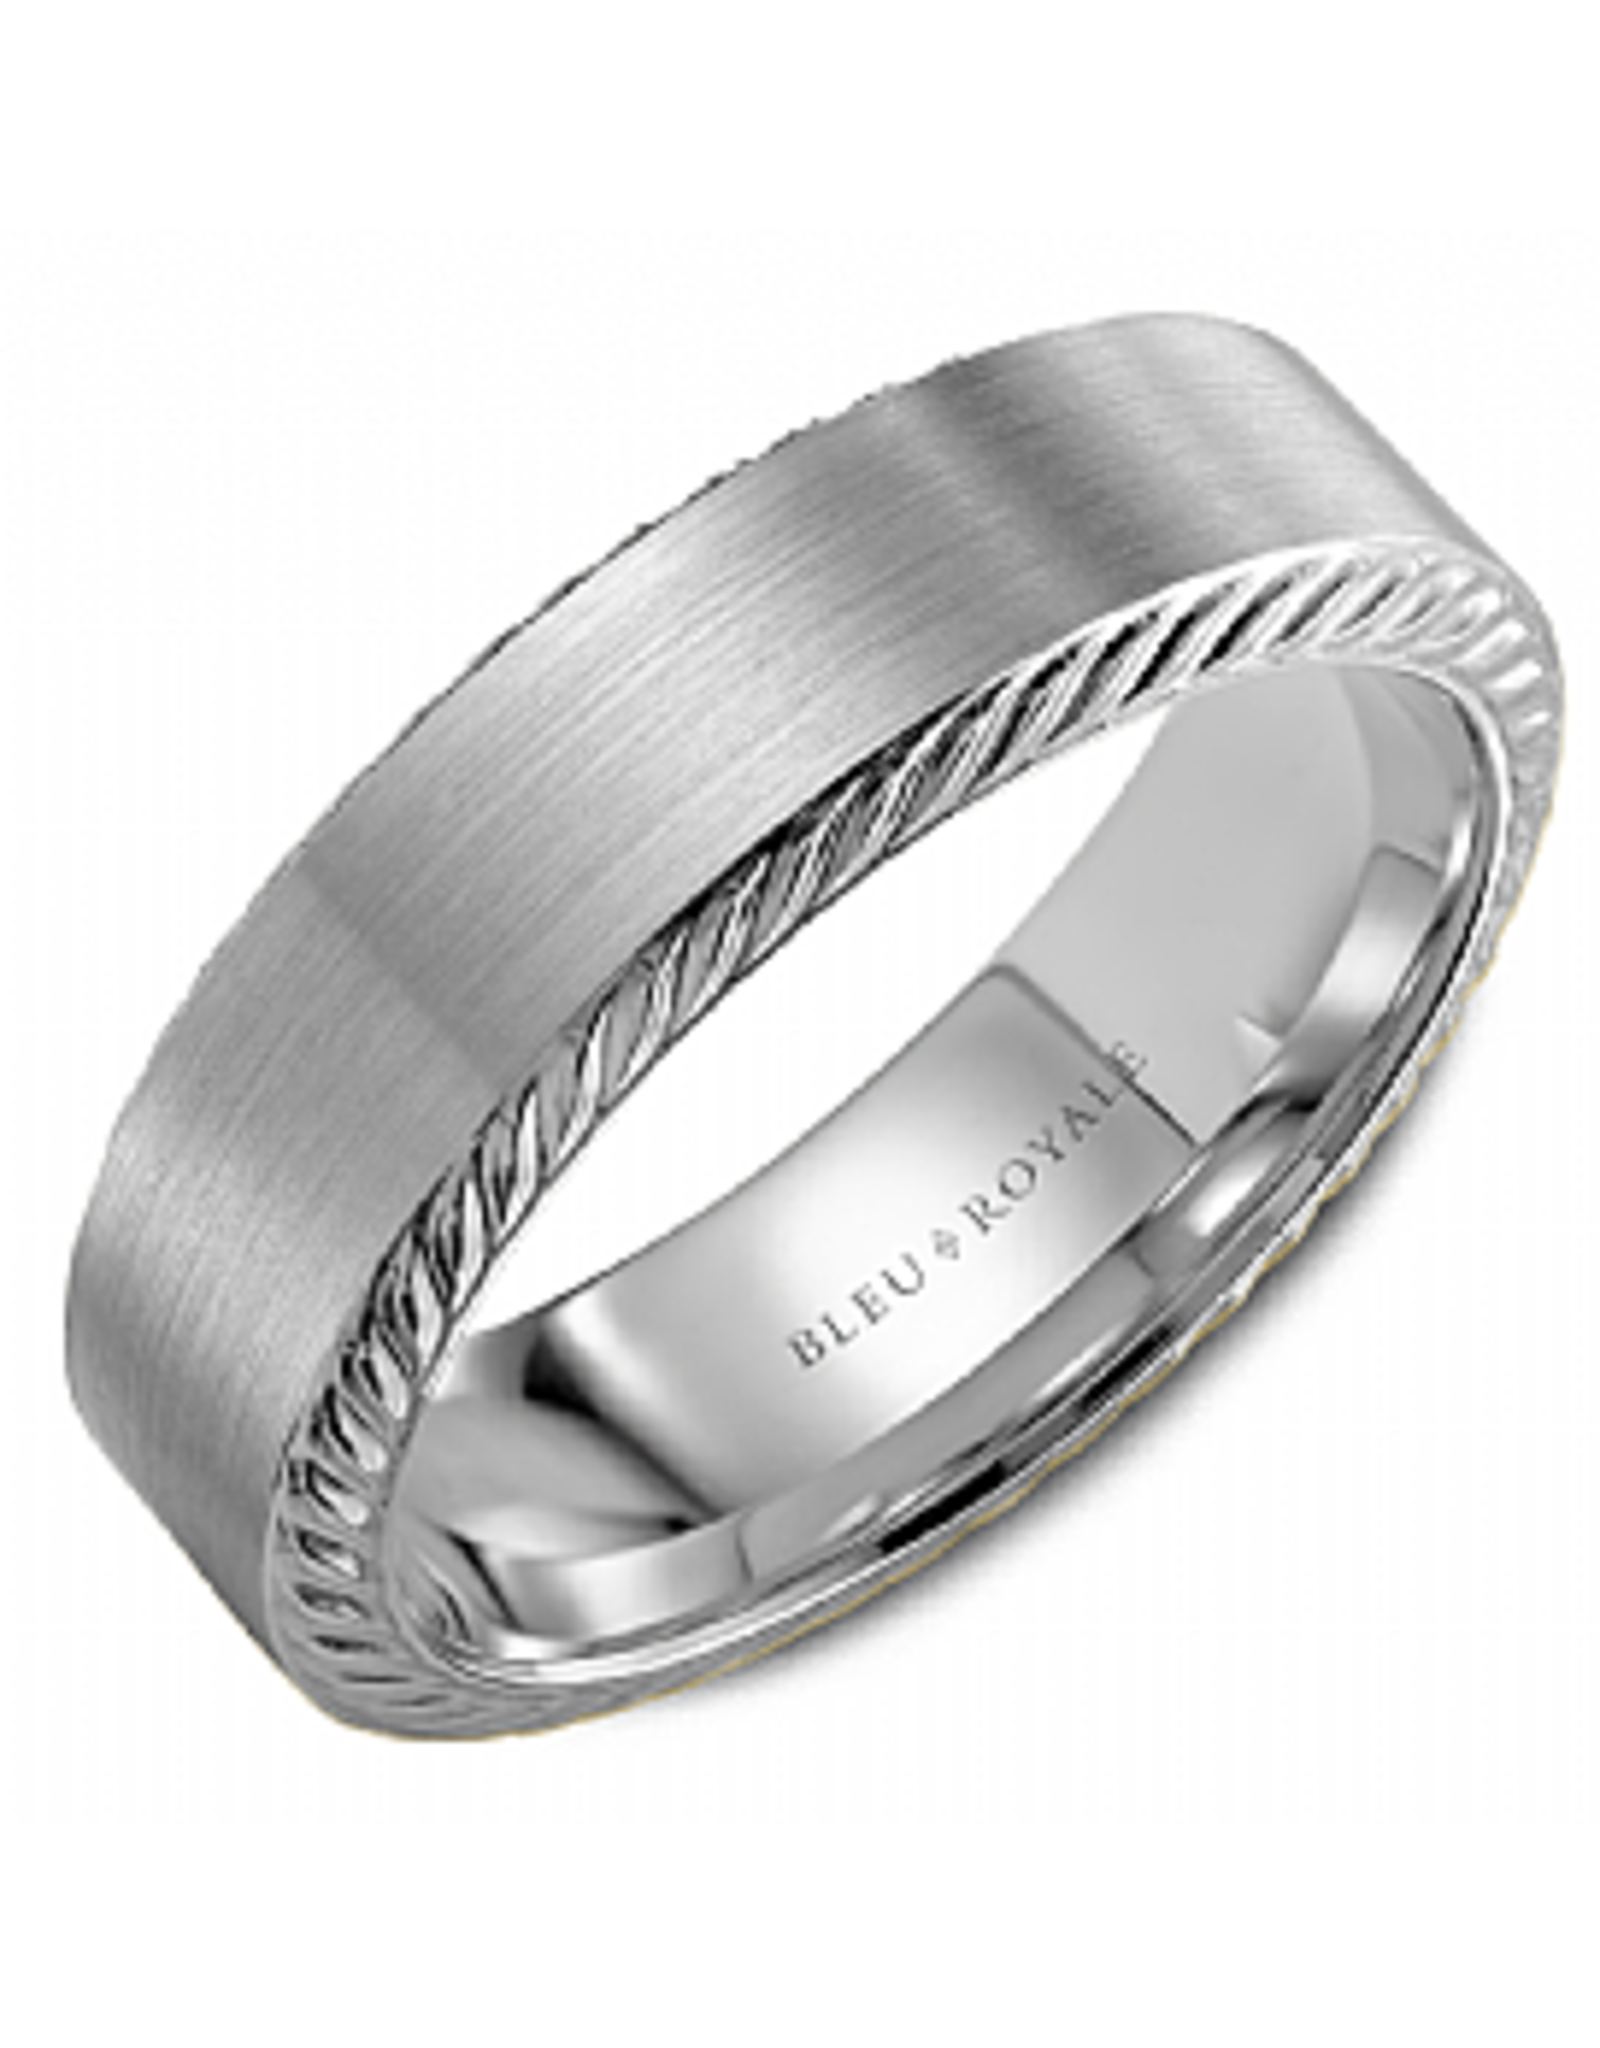 14K White Gold Band with Sandpaper Finish & Rope Edges - 6.5mm